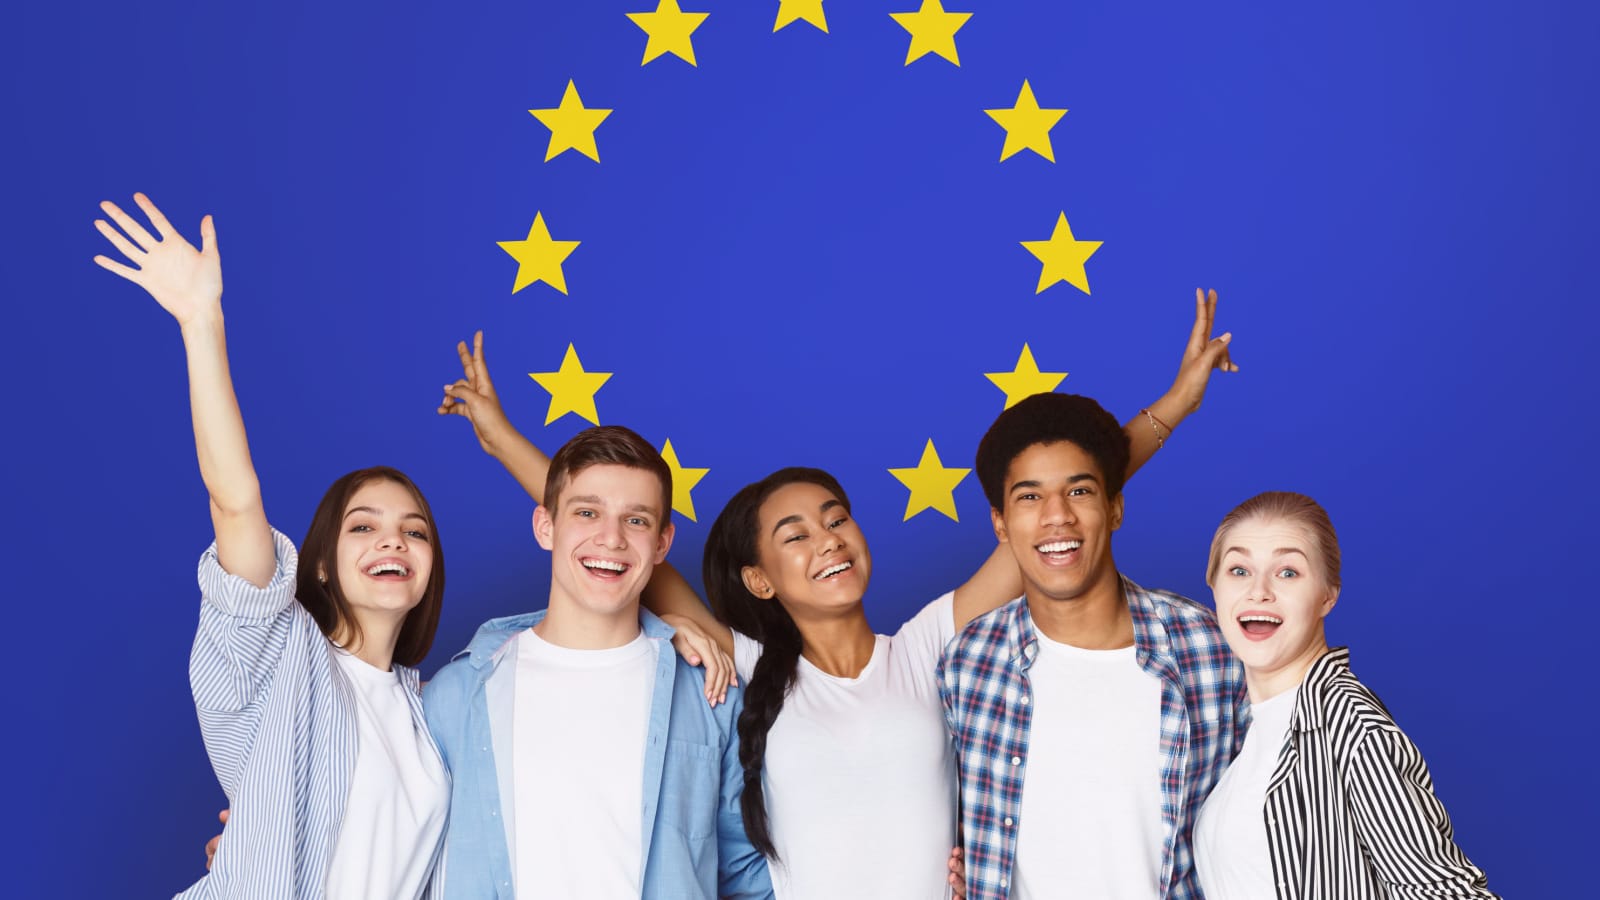 Student Exchange Programs In Eu. Happy Multiracial Teens Posing Over Europe Union Flag, Creative Collage